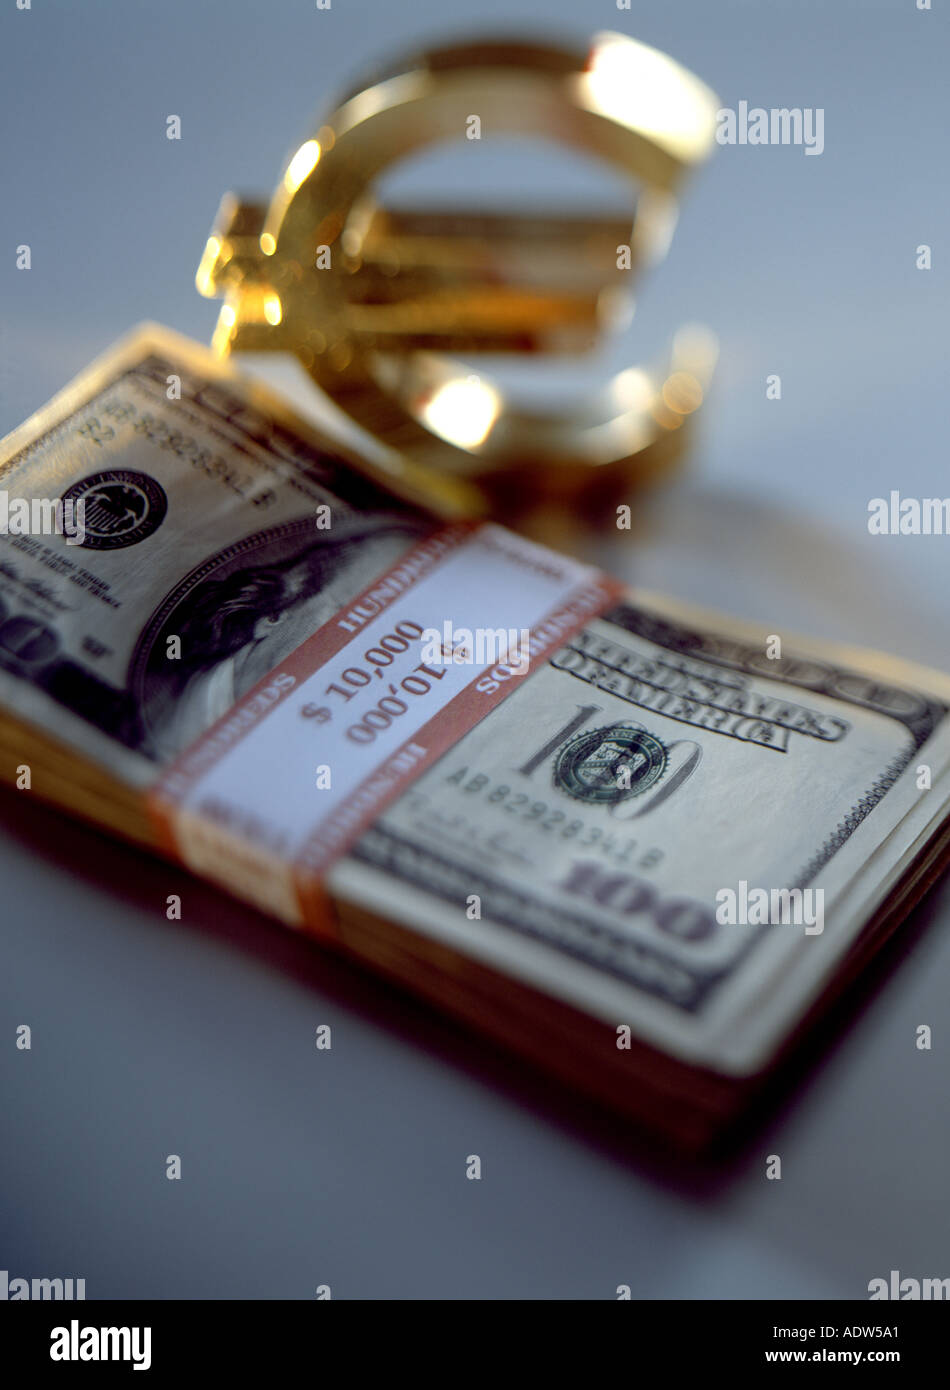 WAD OF 100 US DOLLARS BANKNOTES AND GOLDEN EURO CURRENCY SIGN Stock Photo